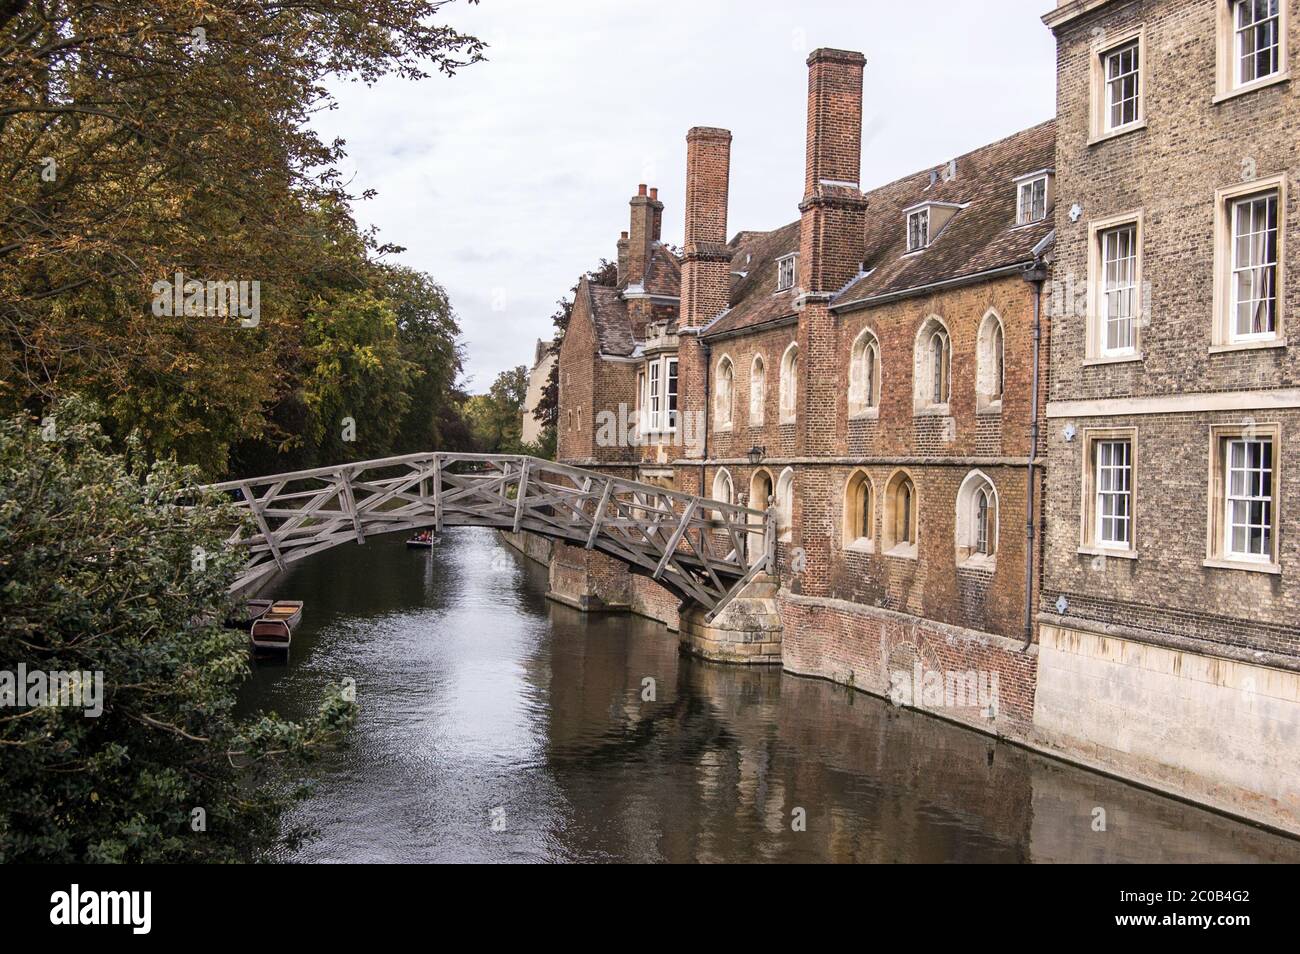 The wooden footbridge at Queens' College, Cambridge known as the Mathematical Bridge. Part of the University of Cambridge. Stock Photo